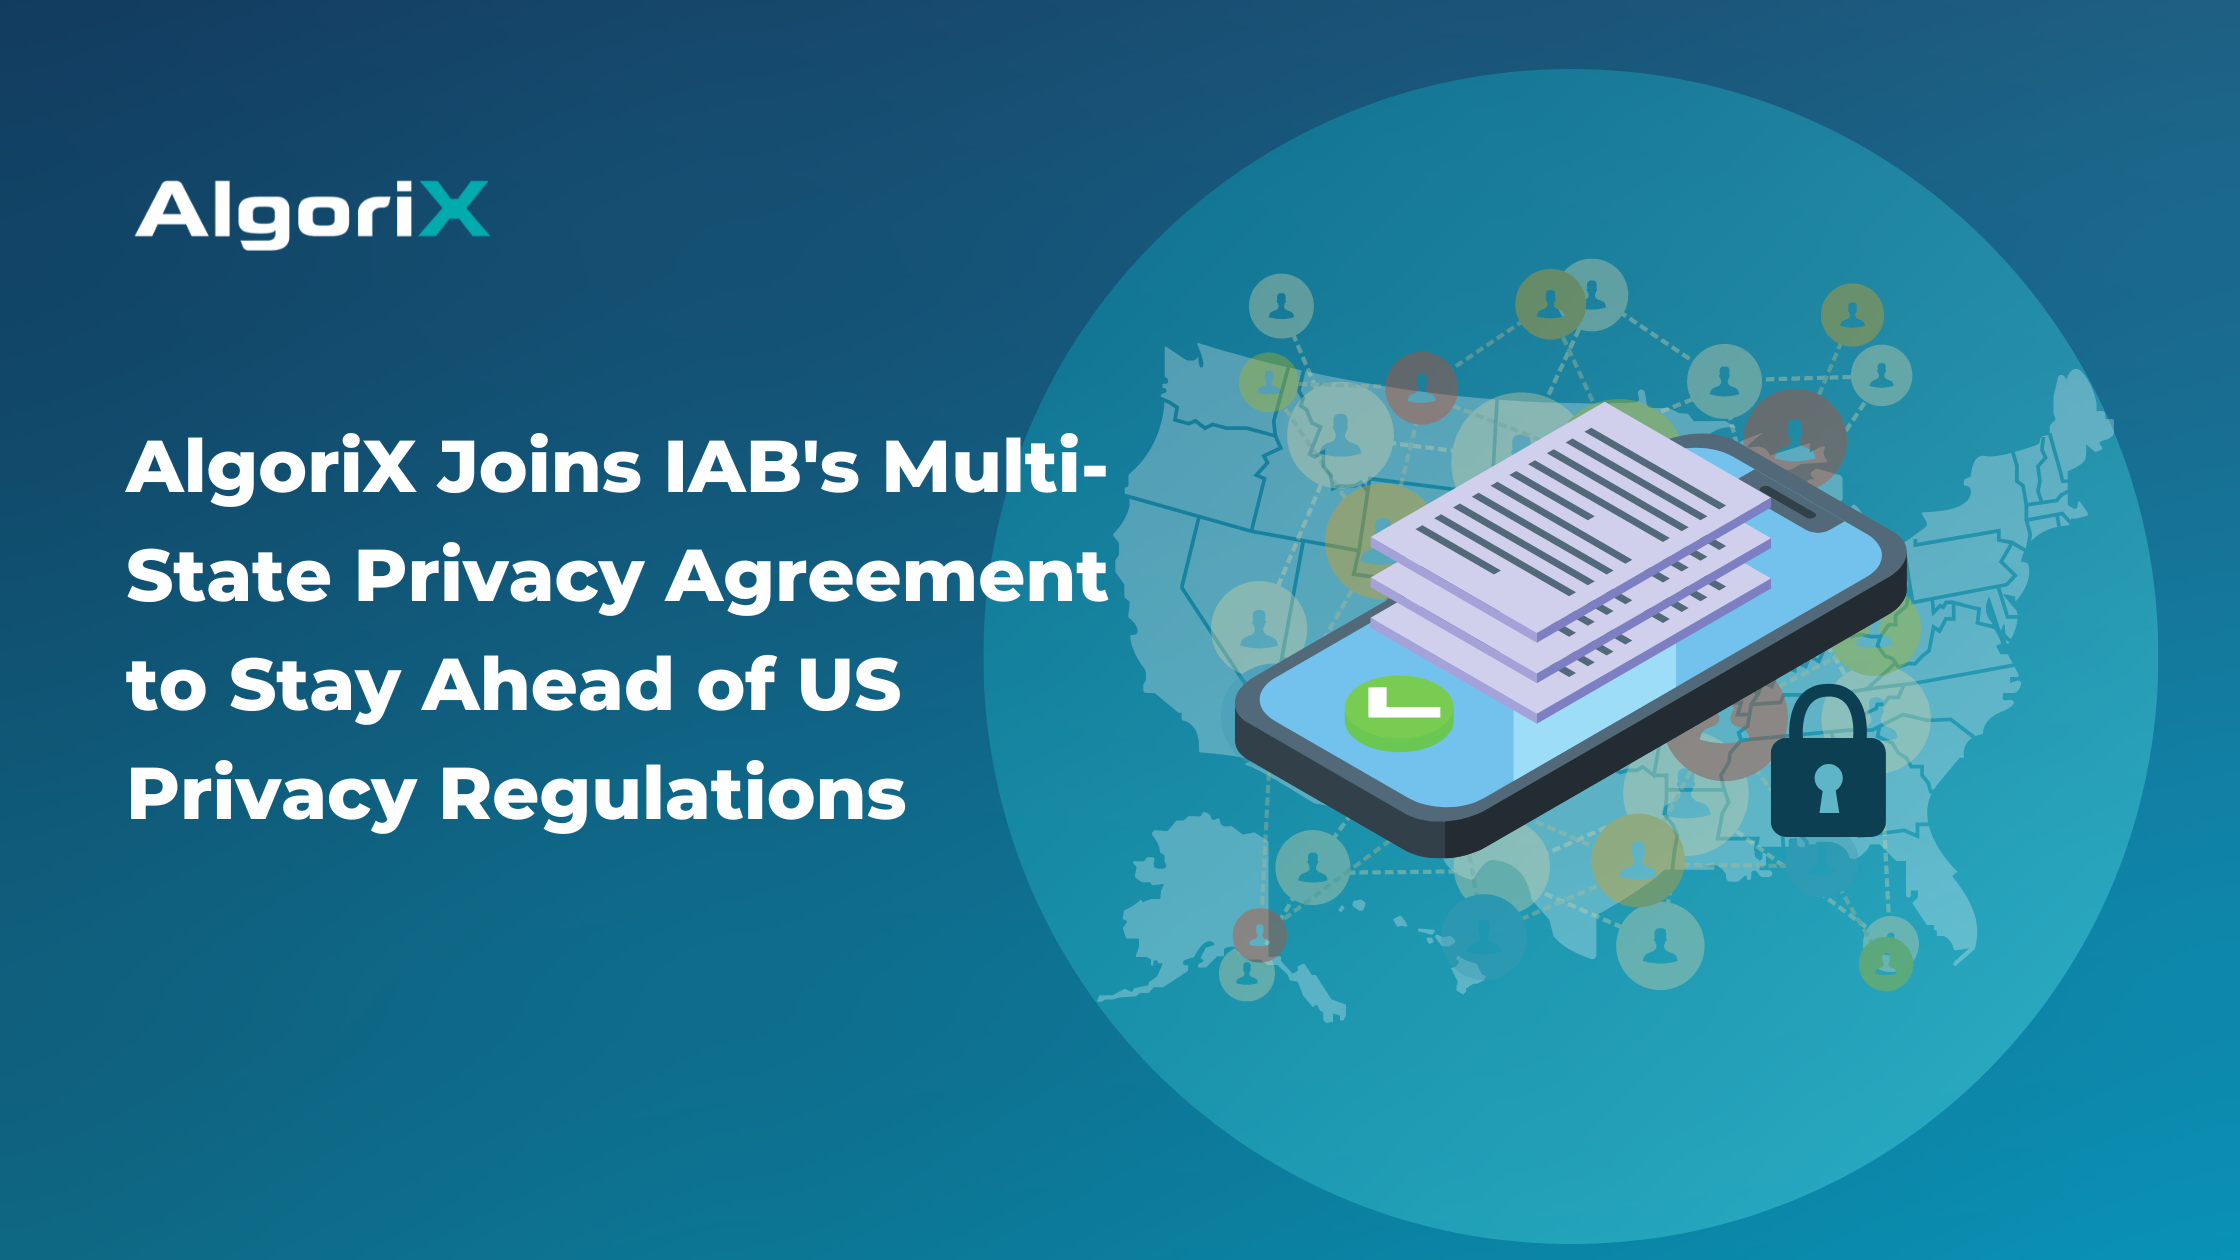 A colorful banner with the United States Map and a mobile phone in shades of blue and teal. The banner includes the title "AlgoriX Joins IAB's Multi-State Privacy Agreement to Stay Ahead of US Privacy Regulations" in bold white letters and the logo of Algorix, a digital marketing agency.